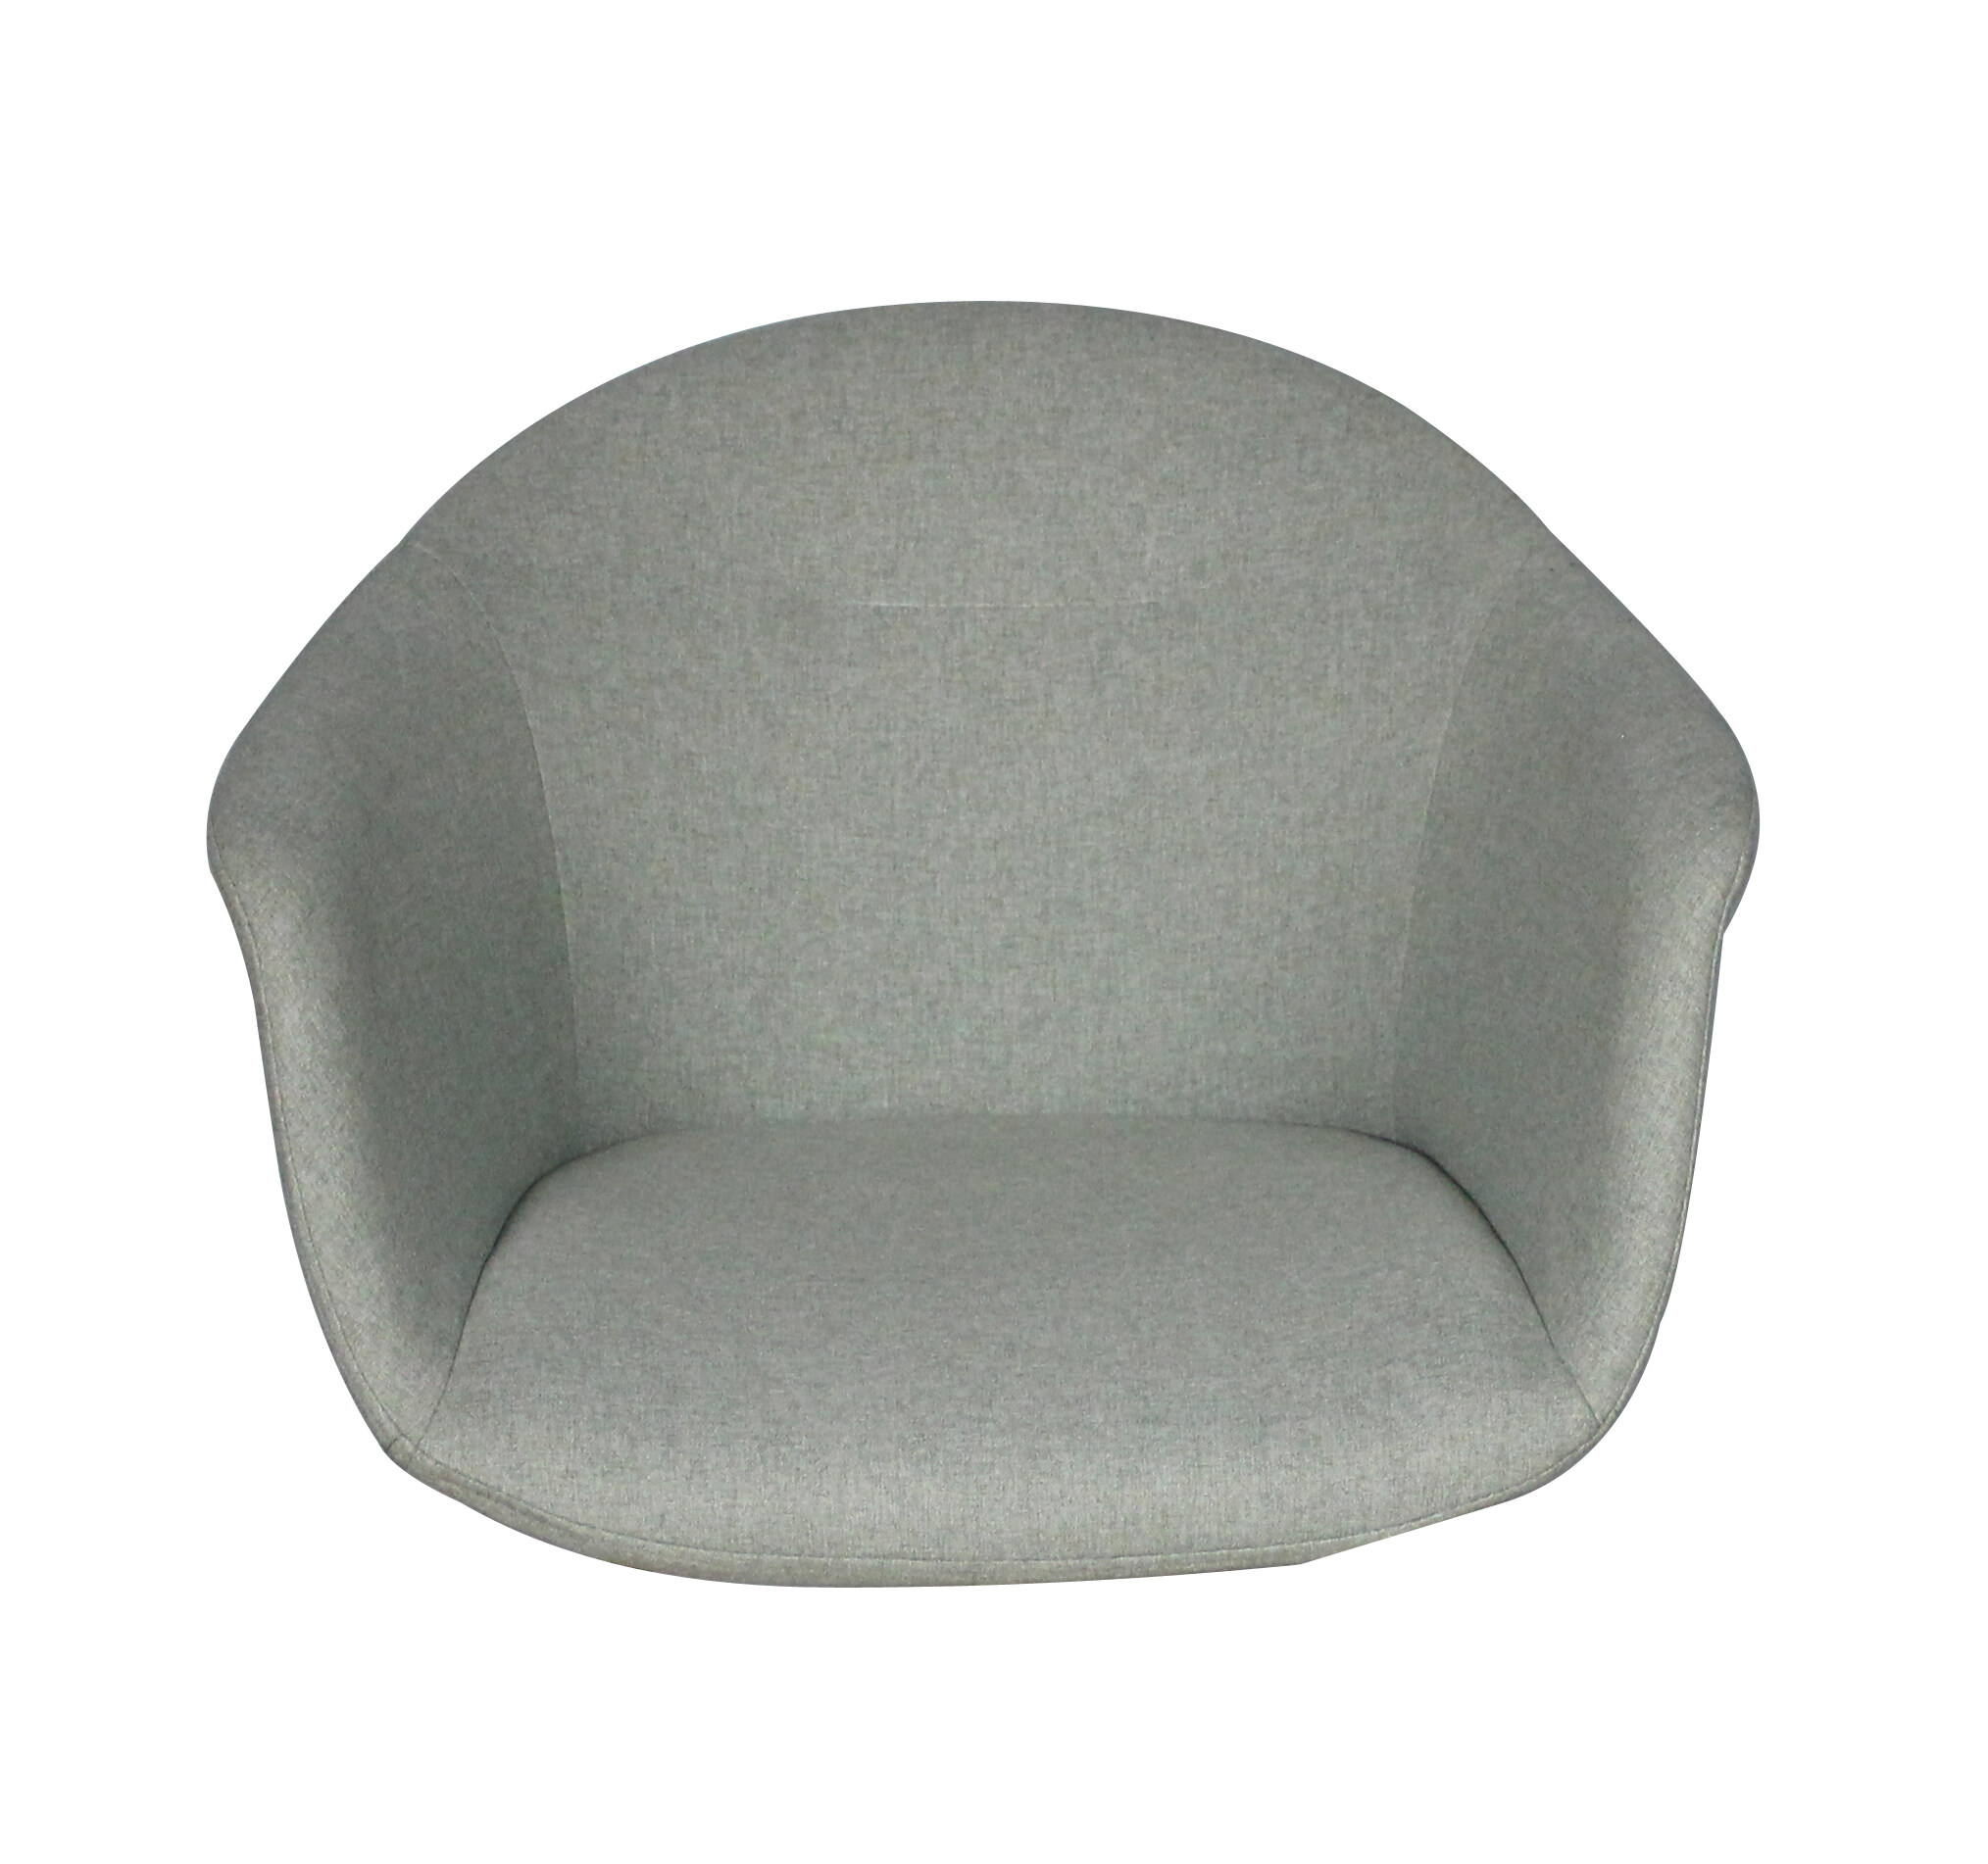 chair parts manufacturer, china office chair parts